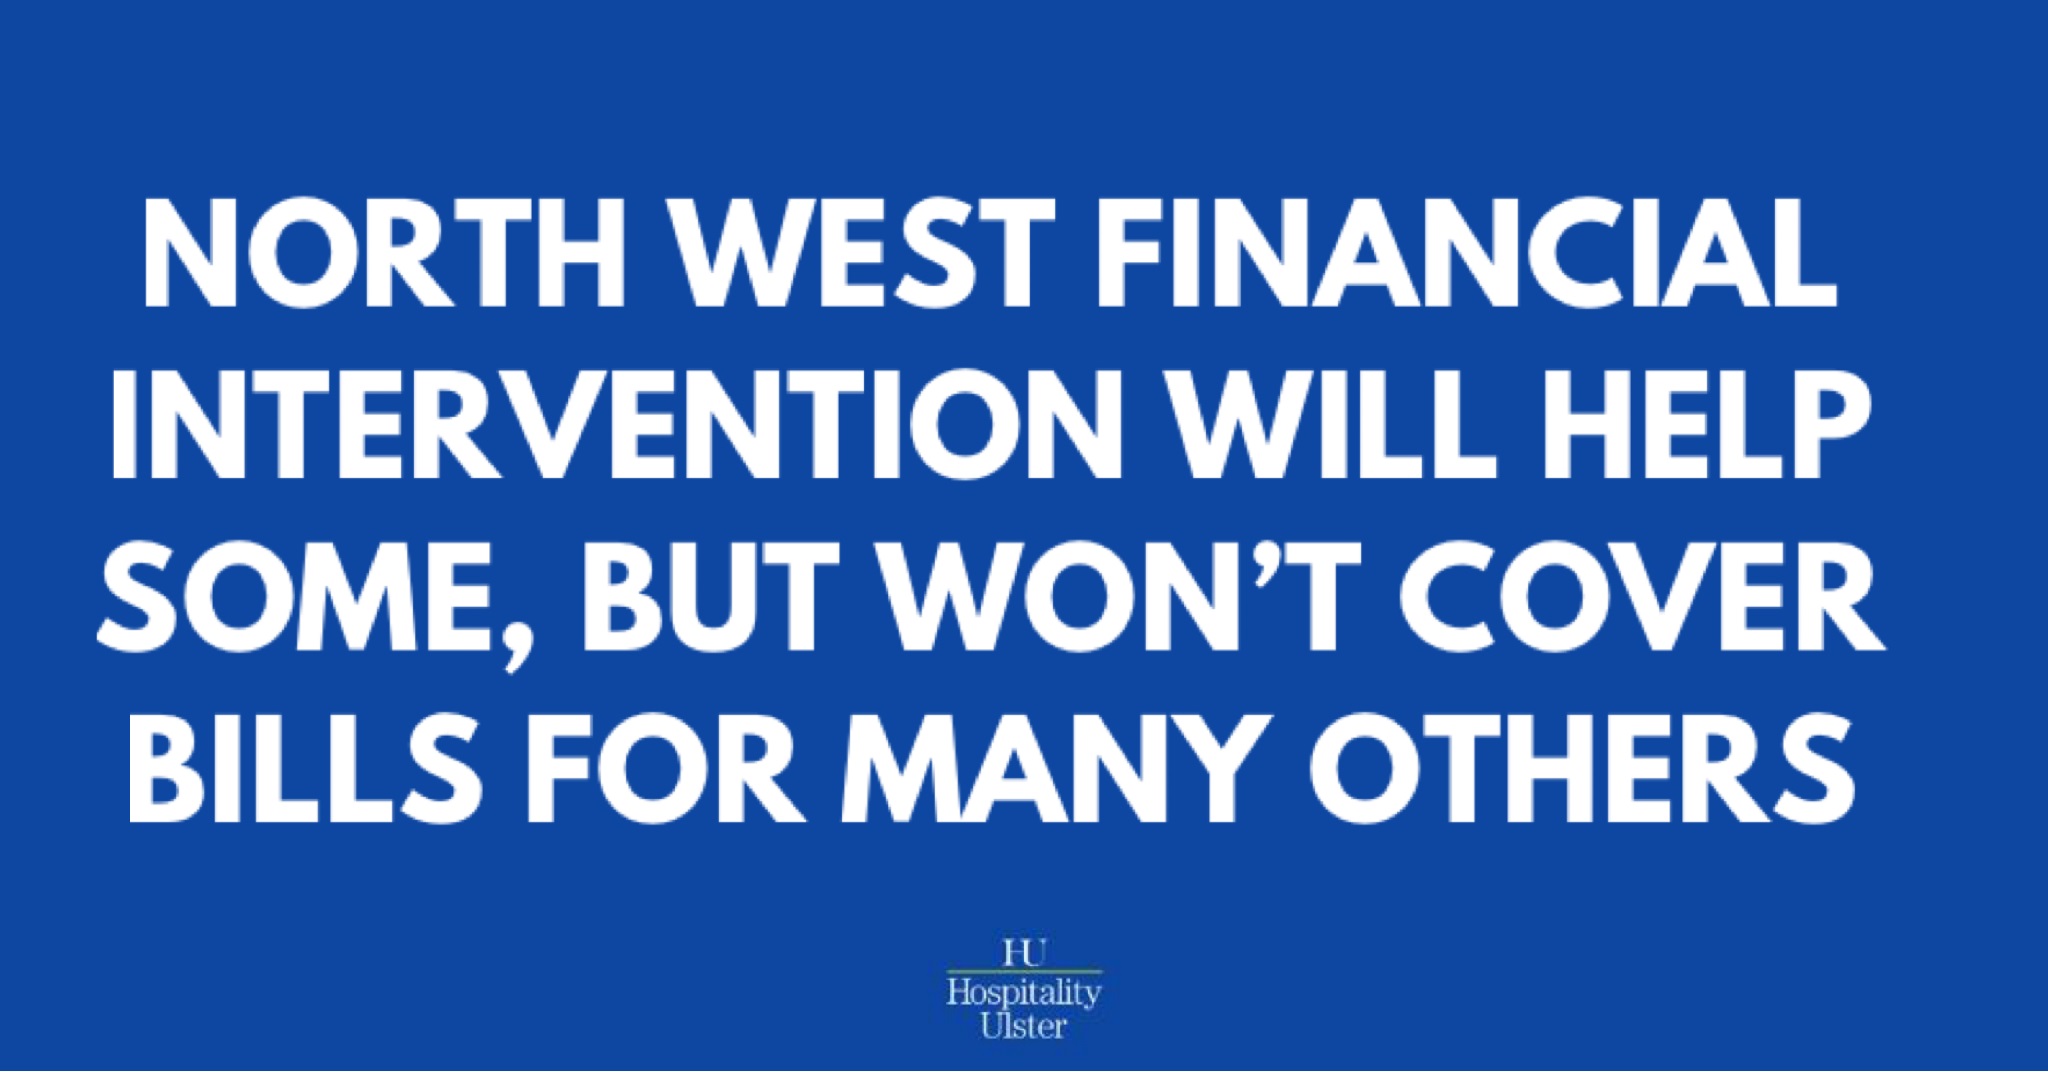 NORTH WEST FINANCIAL INTERVENTION WILL HELP SOME BUT WONT COVER BILLS FOR MANY OTHERS